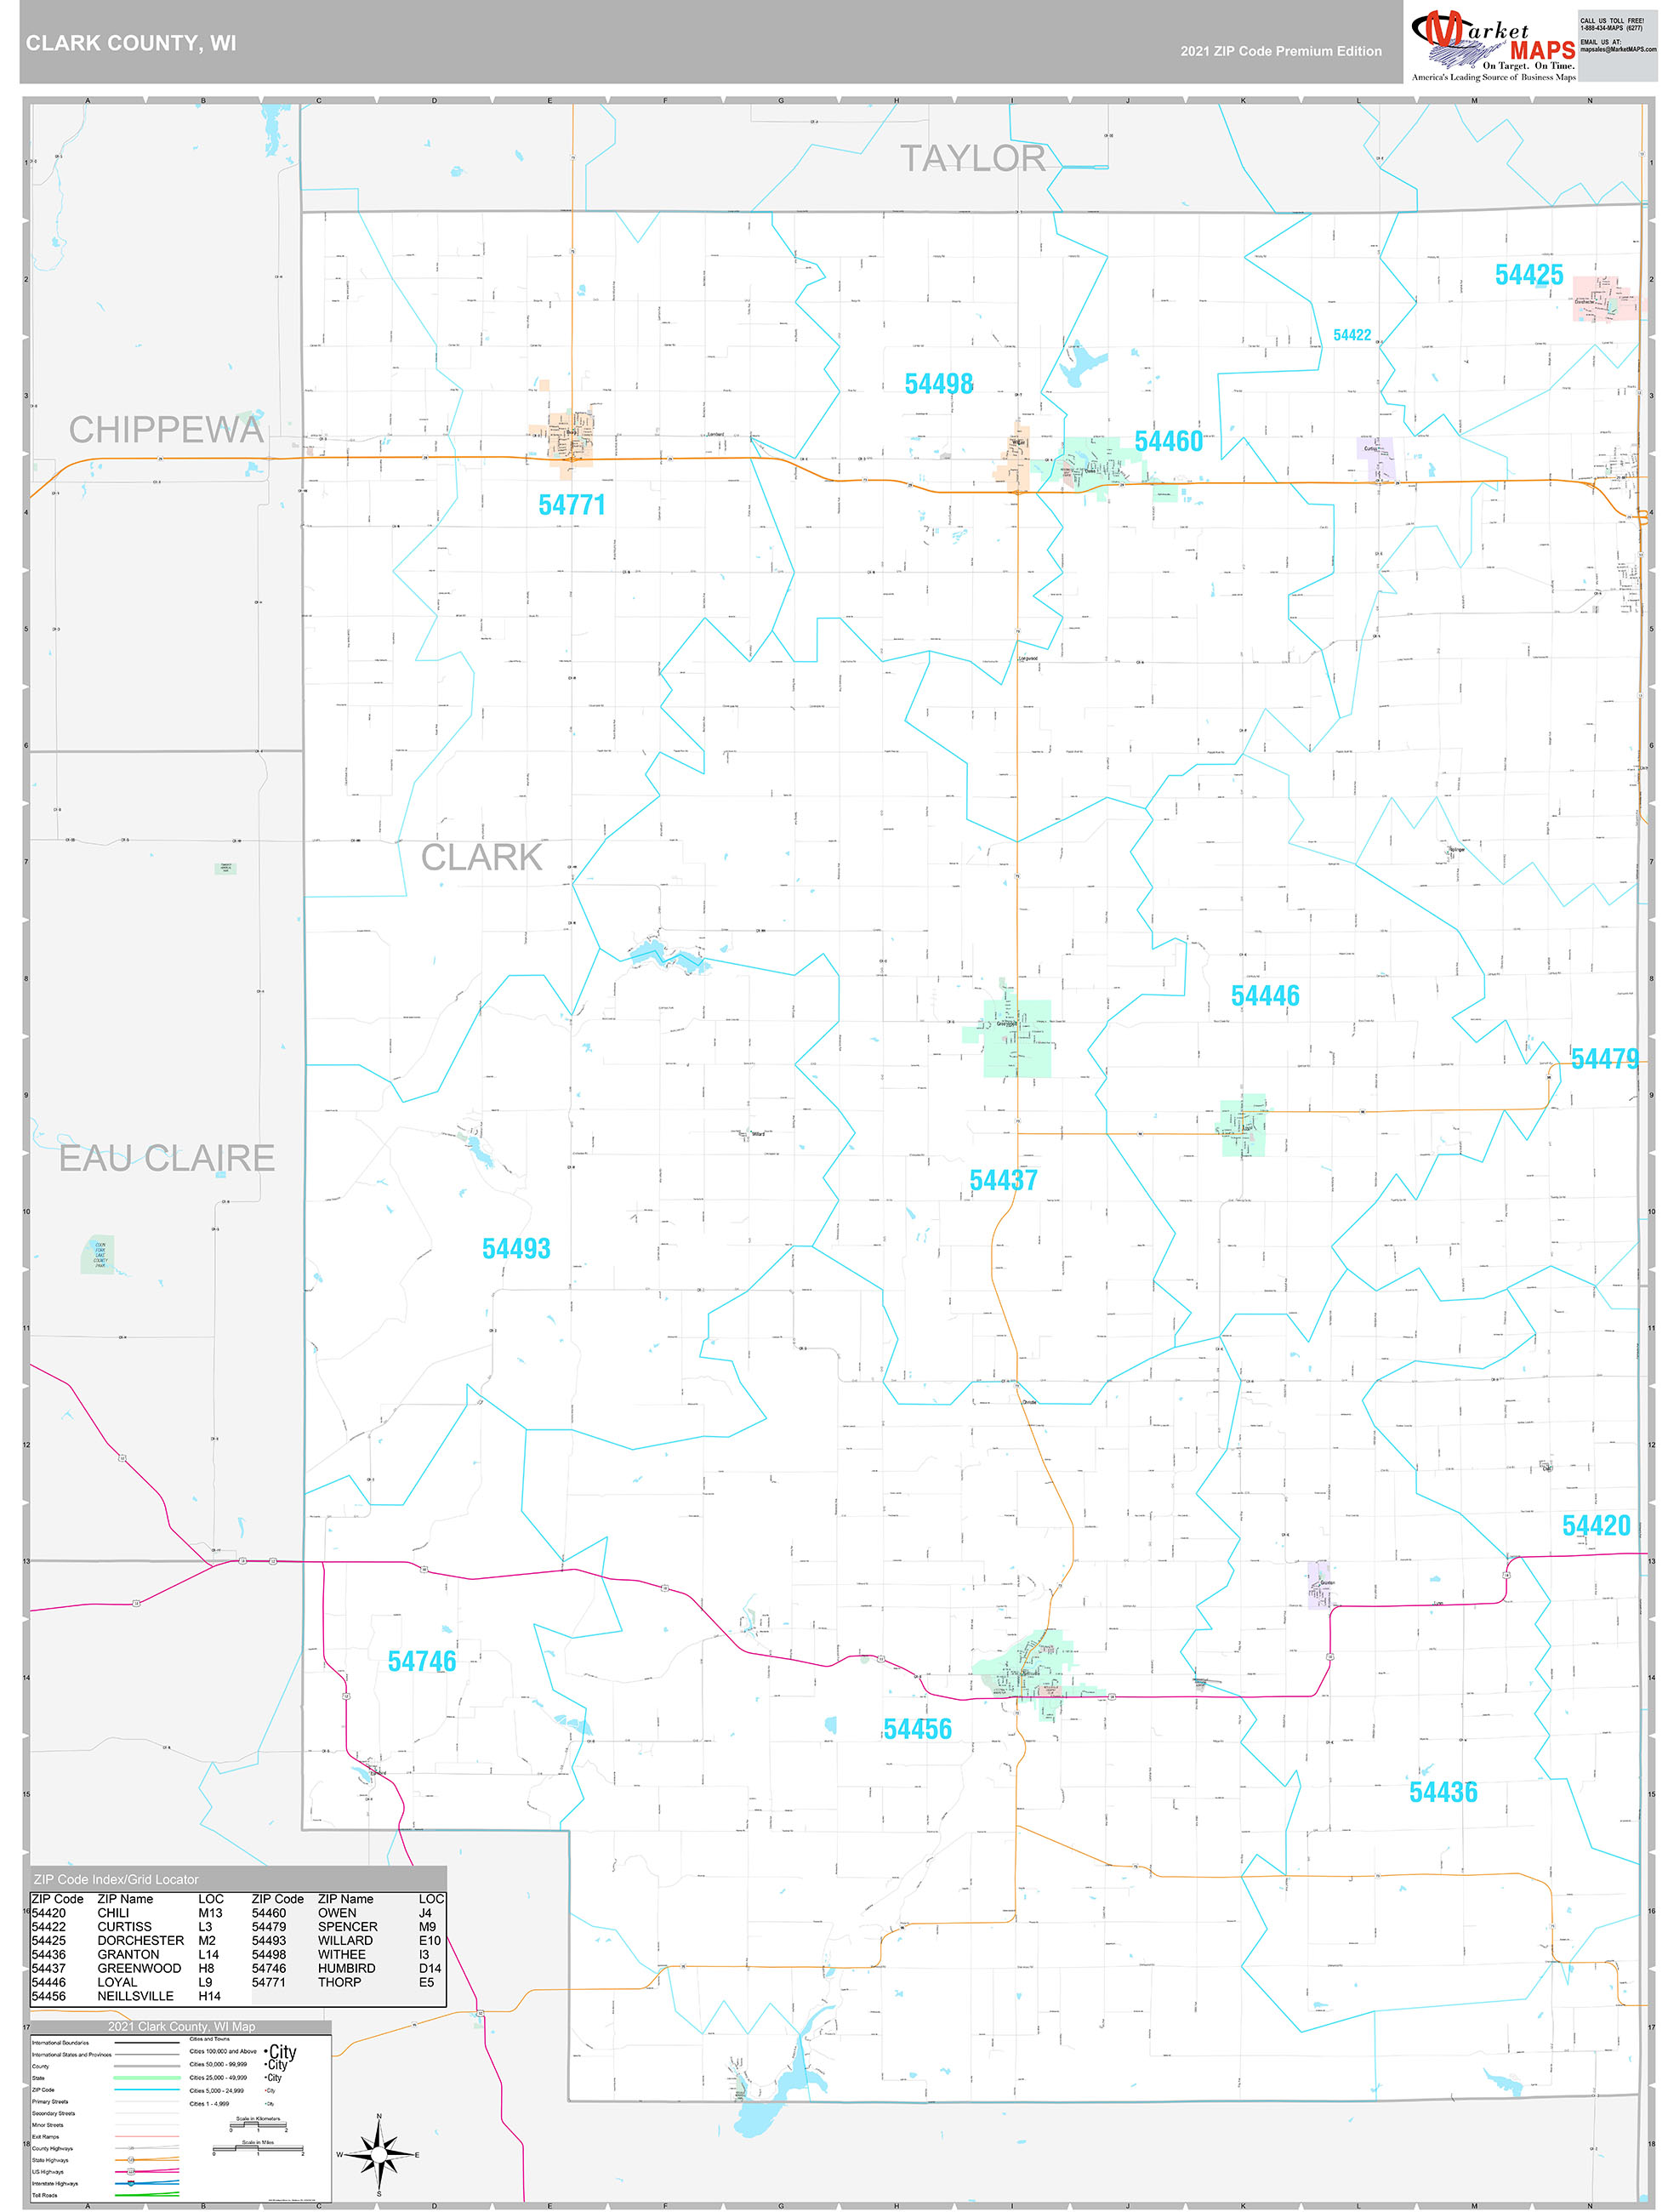 Clark County, WI Wall Map Premium Style by MarketMAPS MapSales